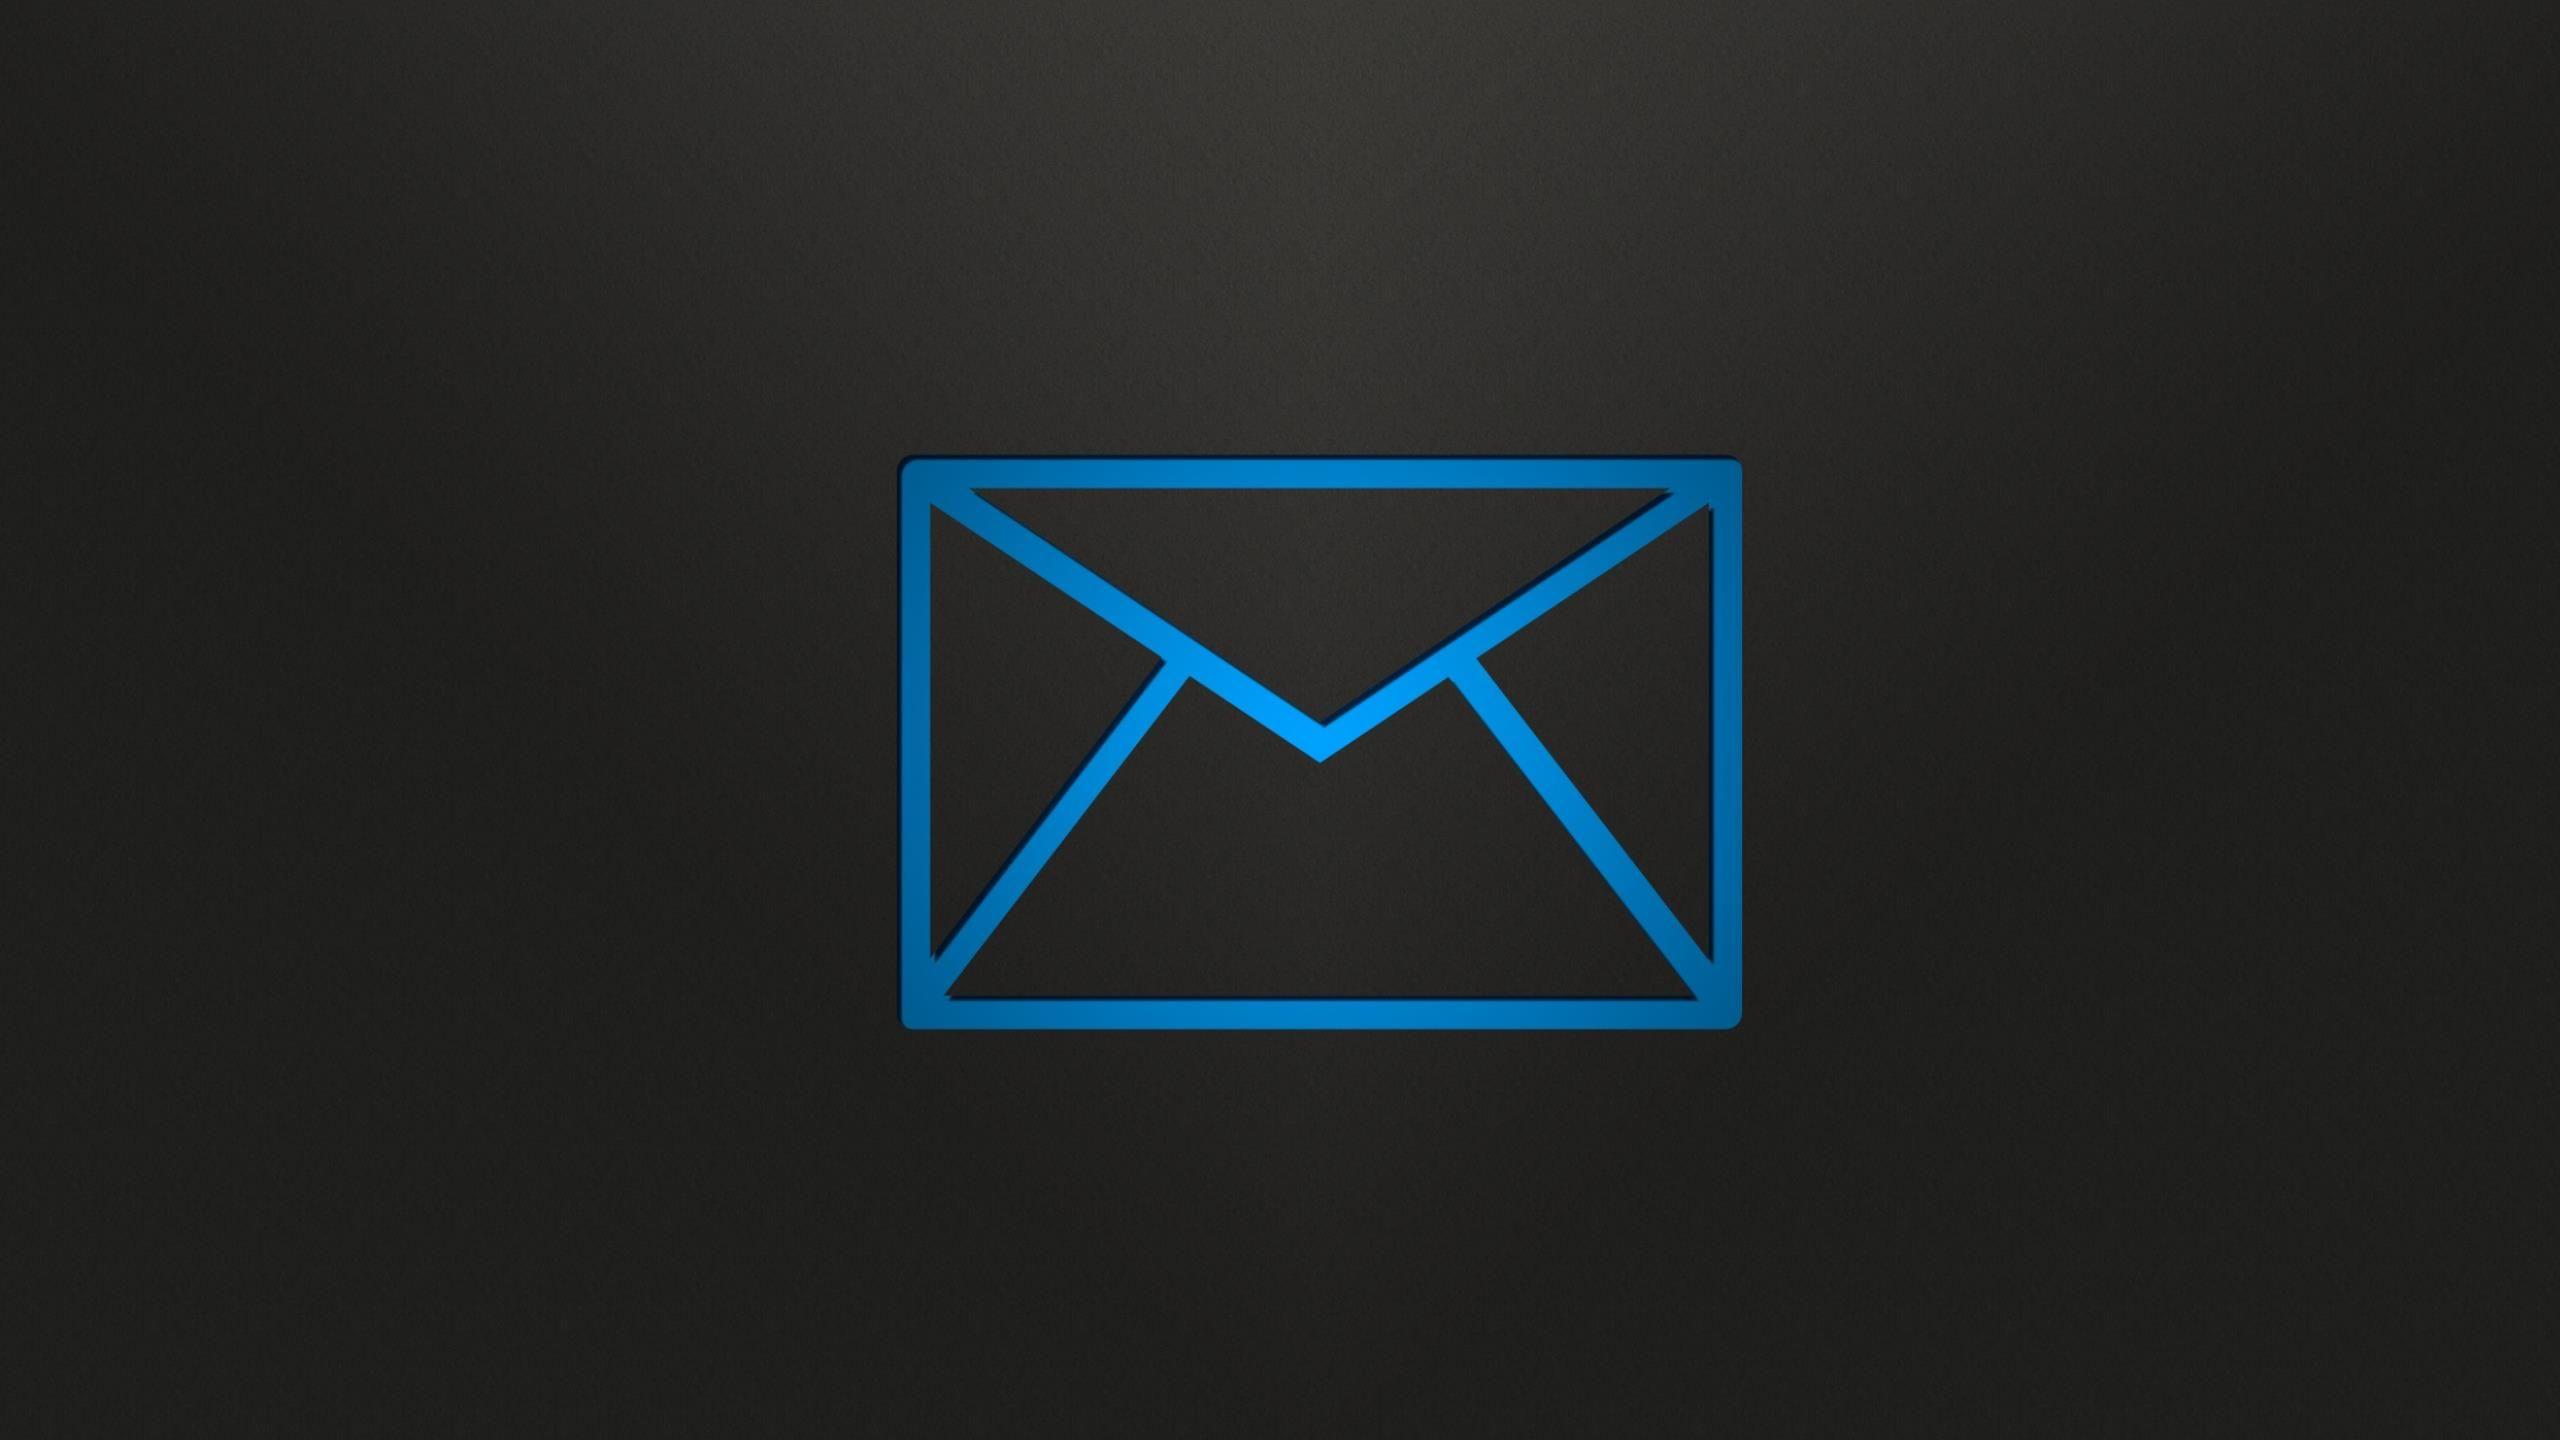 Widescreen FHDQ Wallpaper of Email for Windows and Mac Systems